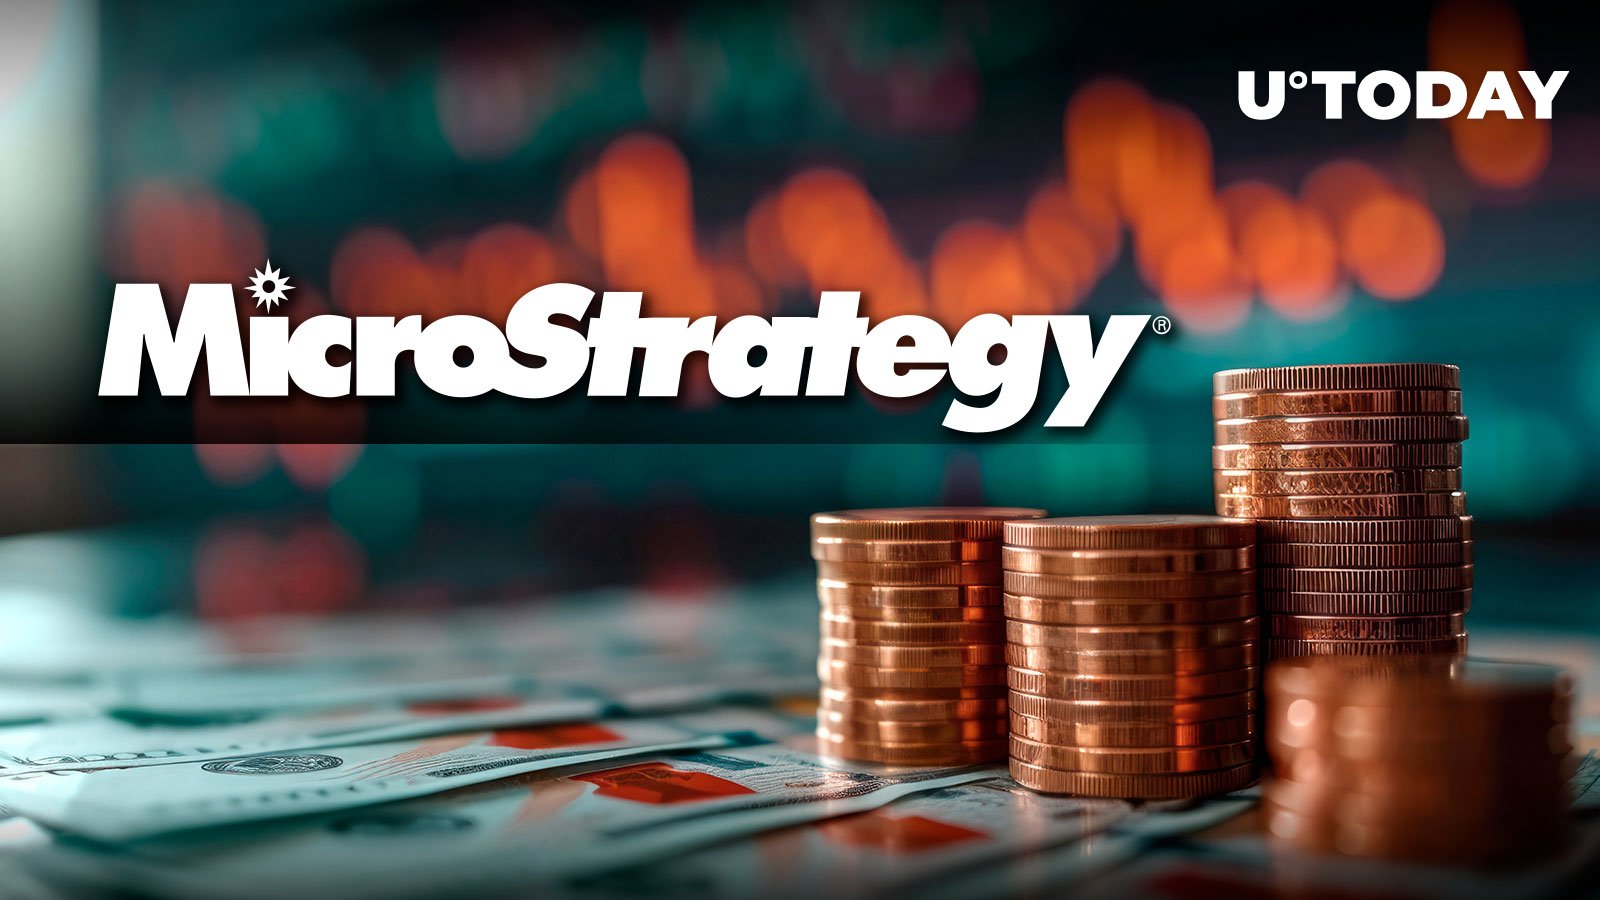 MicroStrategy to Be Added to Major Equity Index